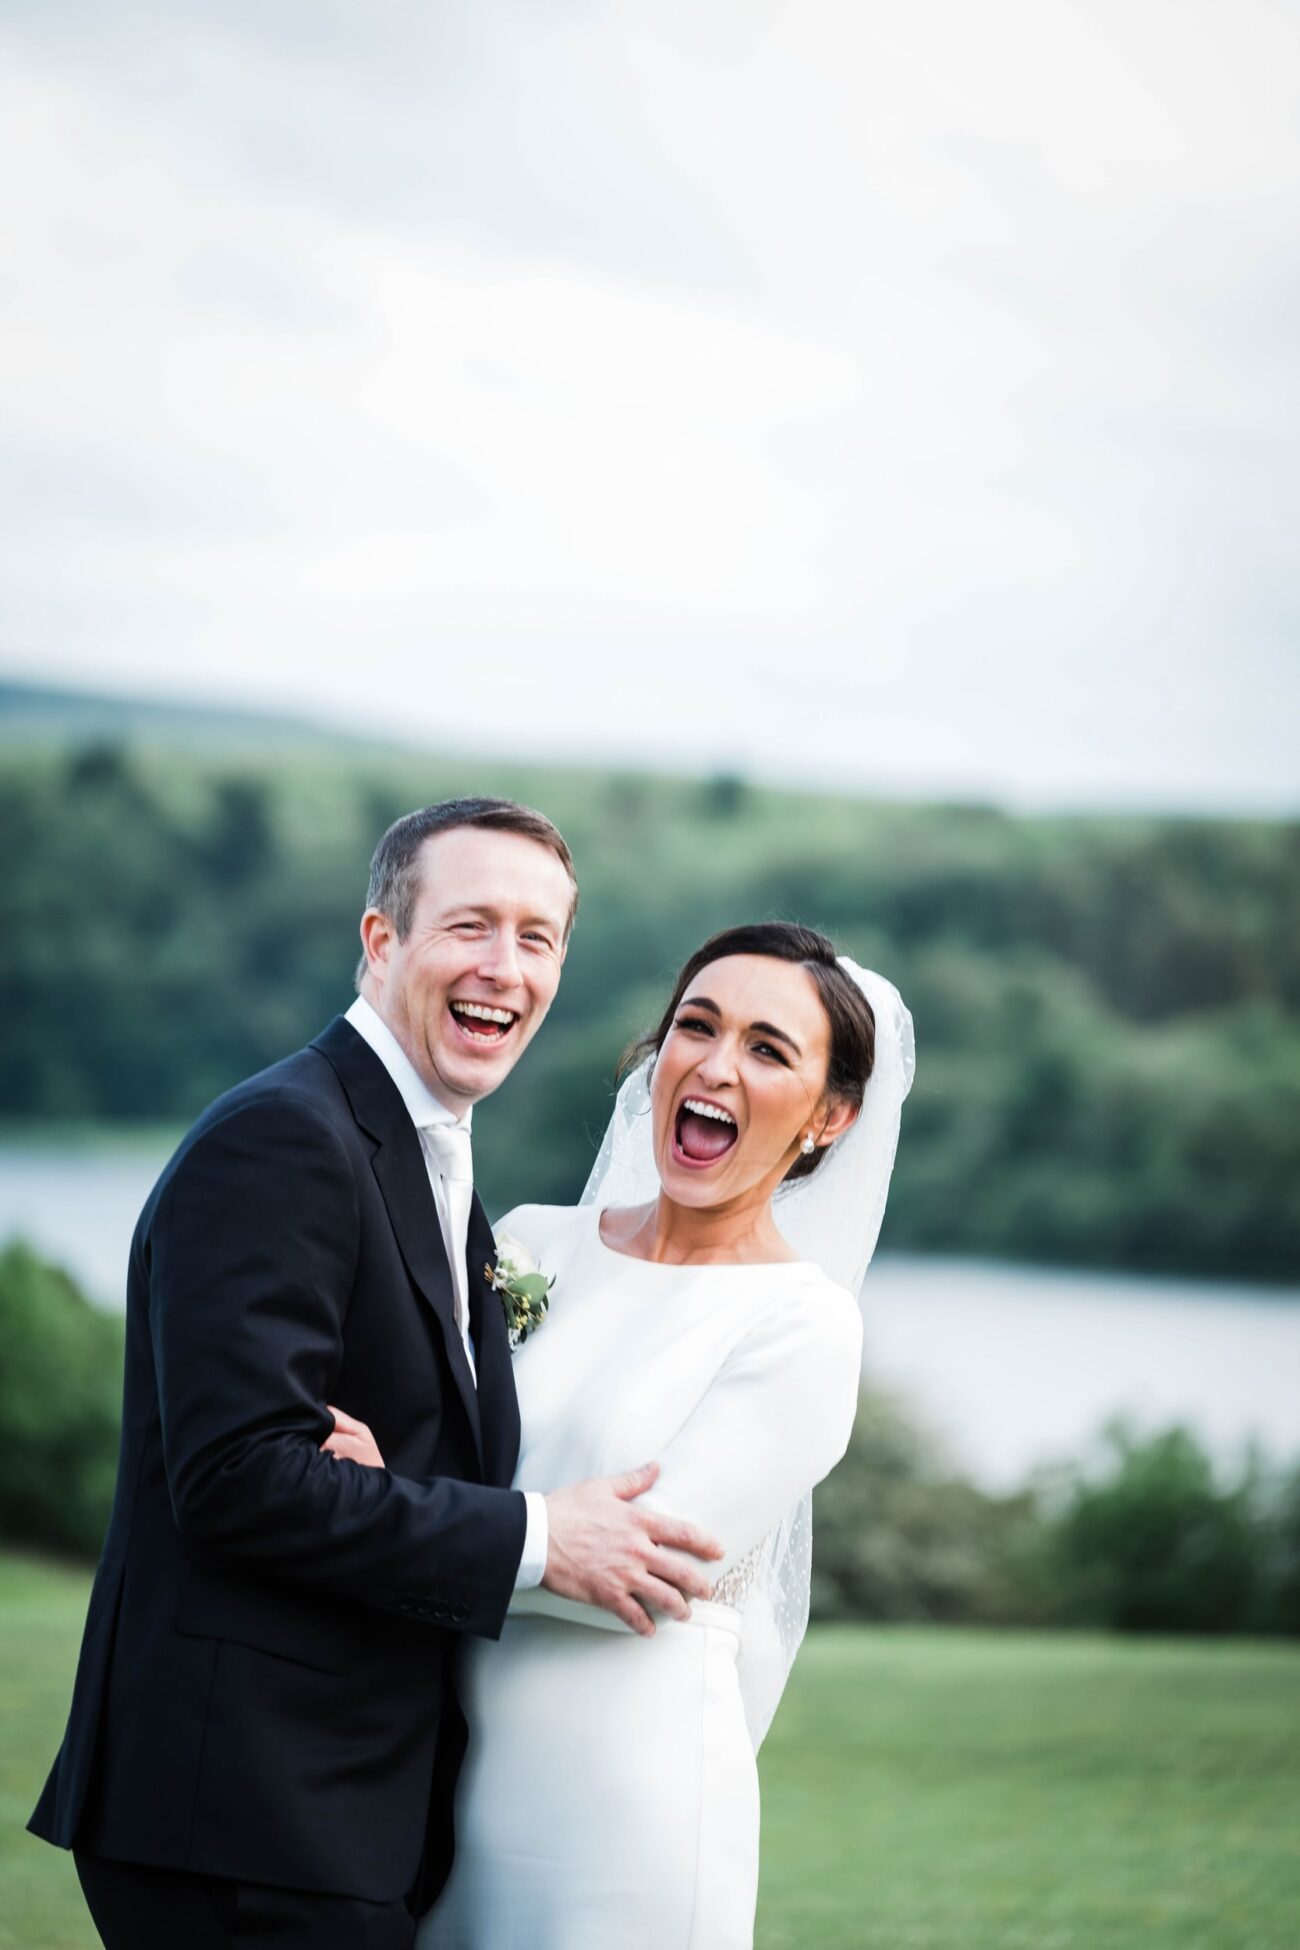 Bride and groom arm in arm laughing at the camera at Kilronan Castle